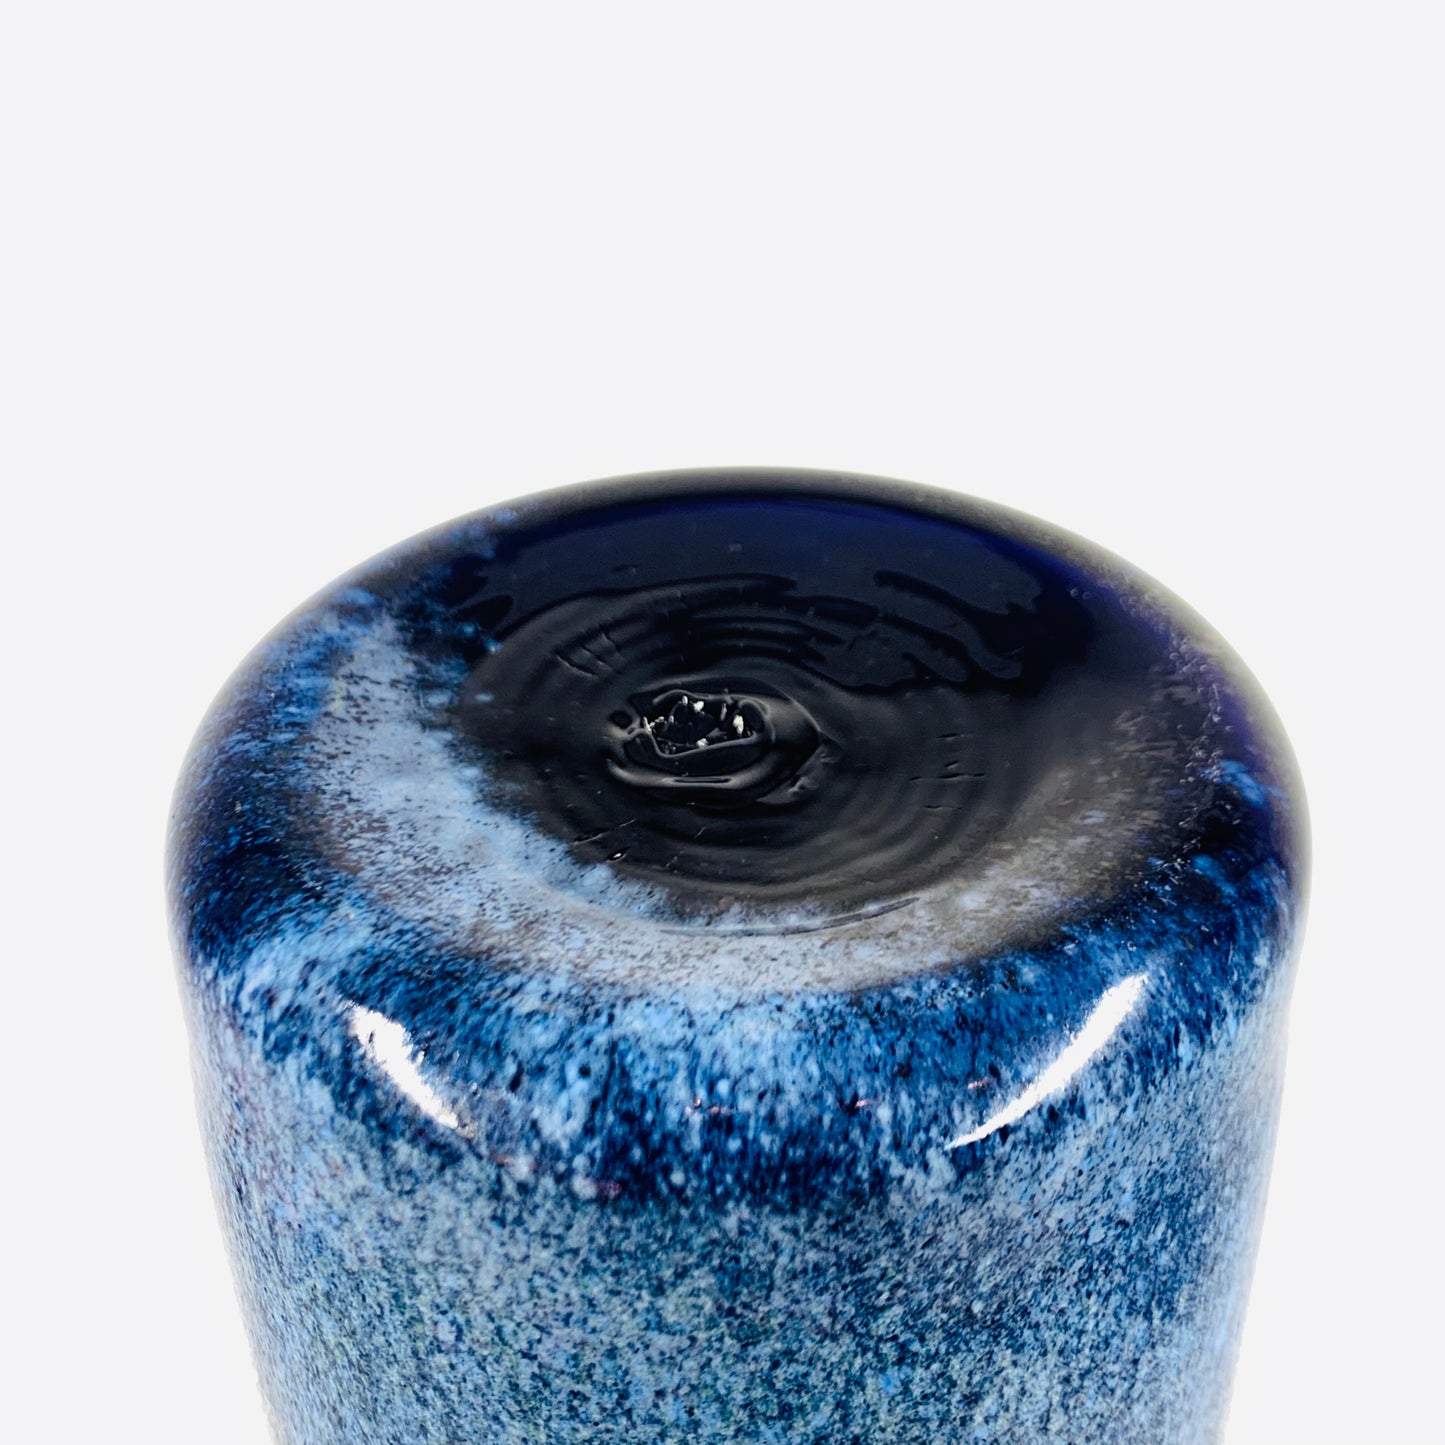 1990s Australian studio mouth-blown blue speckled glass vase by Keith Rowe